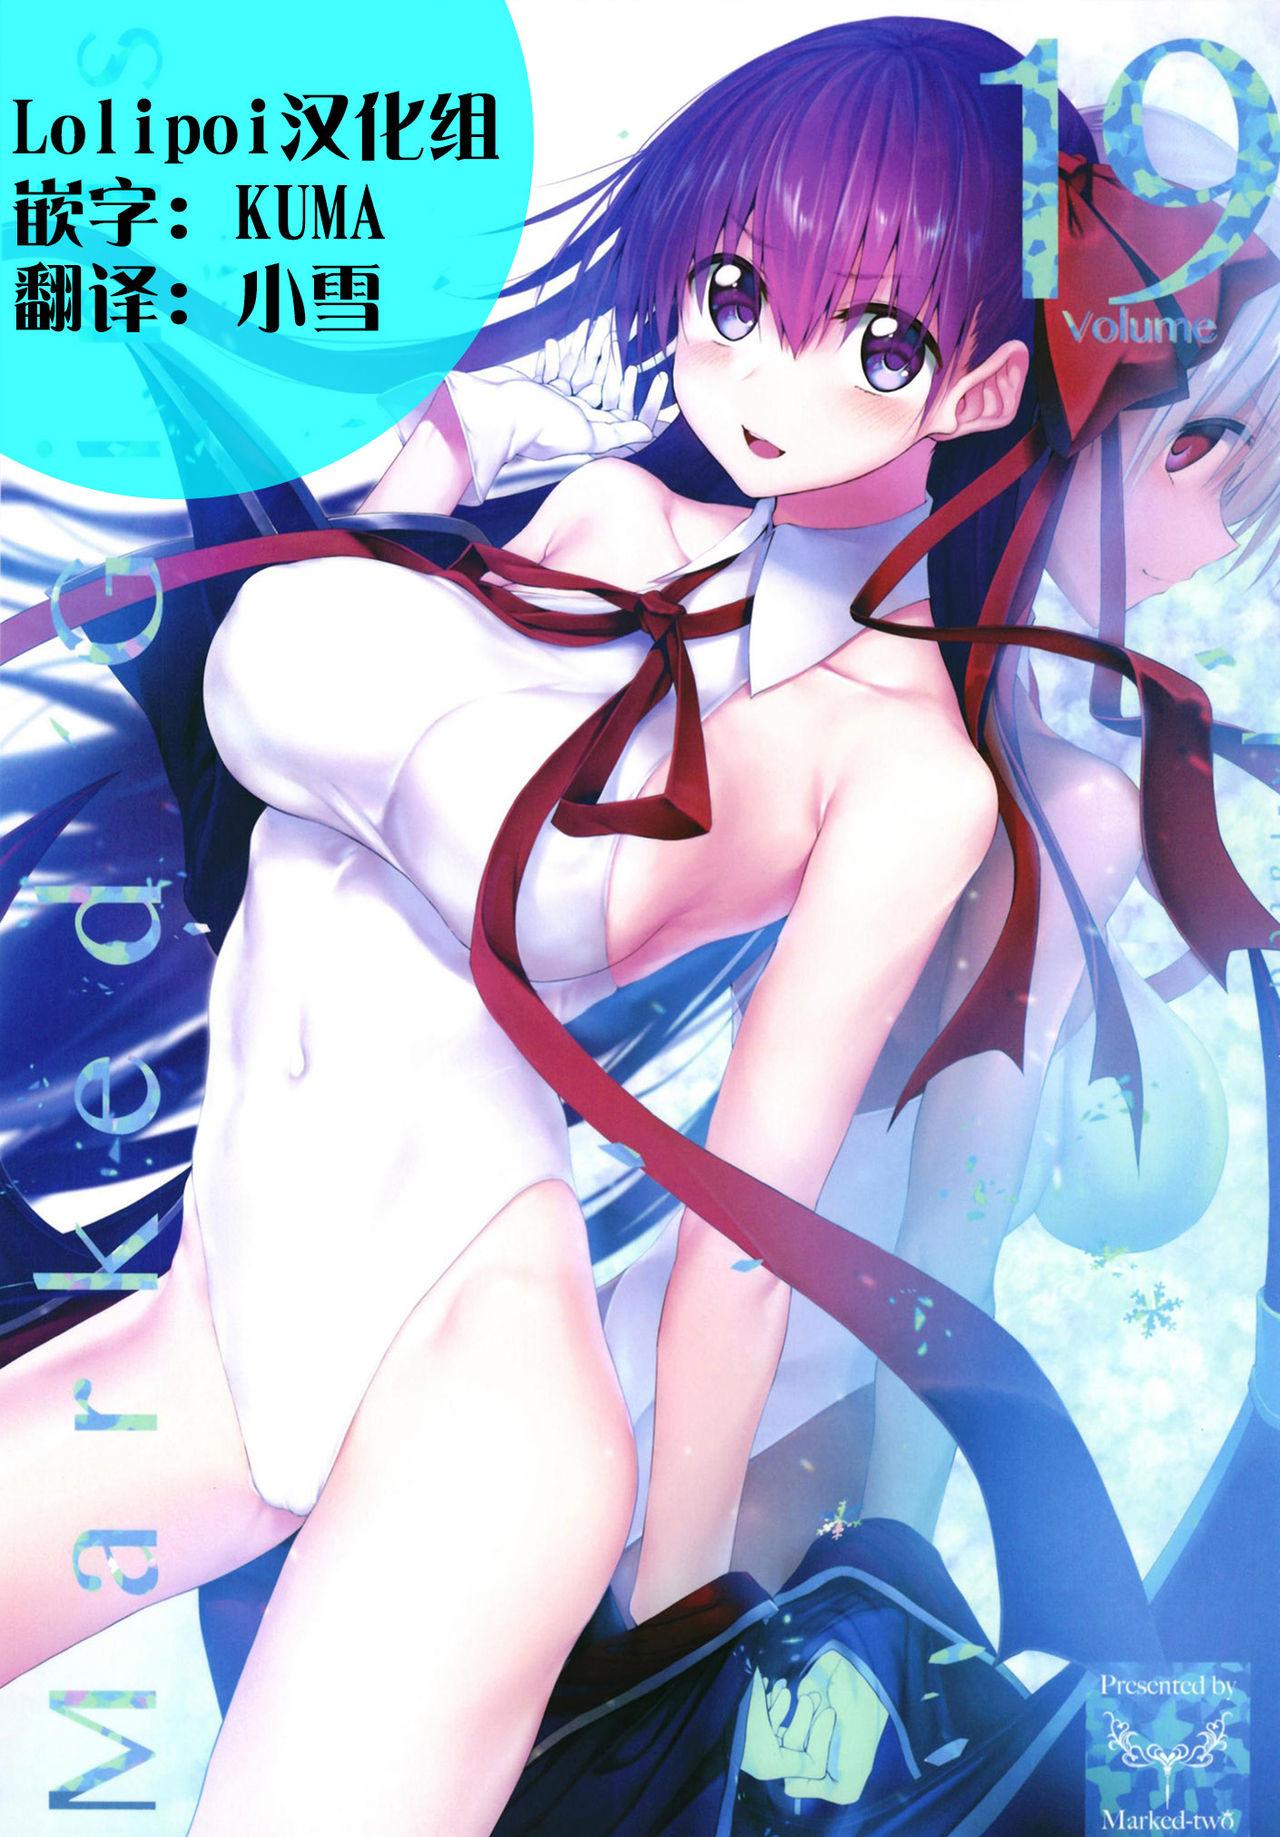 Cougar Marked Girls Vol. 19 - Fate grand order Amateur - Picture 1